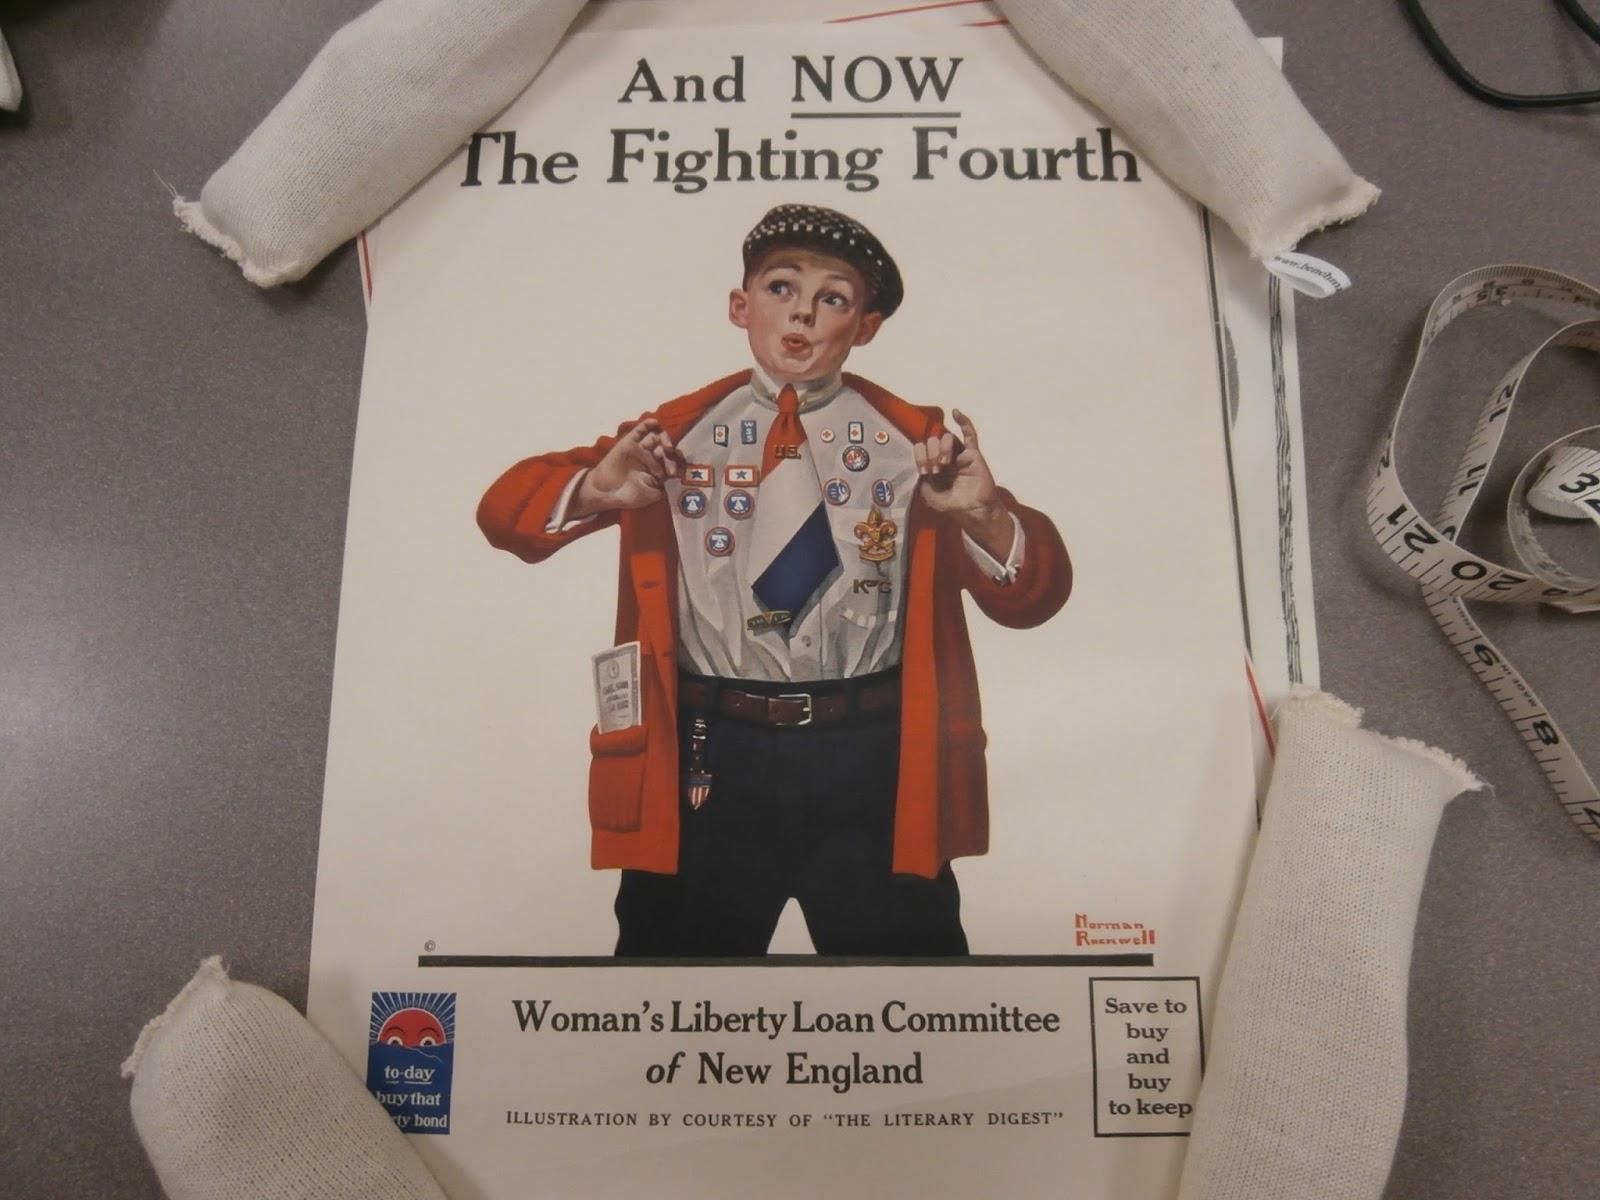 Poster by the Woman's Liberty Loan Committee of New England with illustration of young boy with numerous badges on his shirt that reads: And NOW The Fighting Fourth.